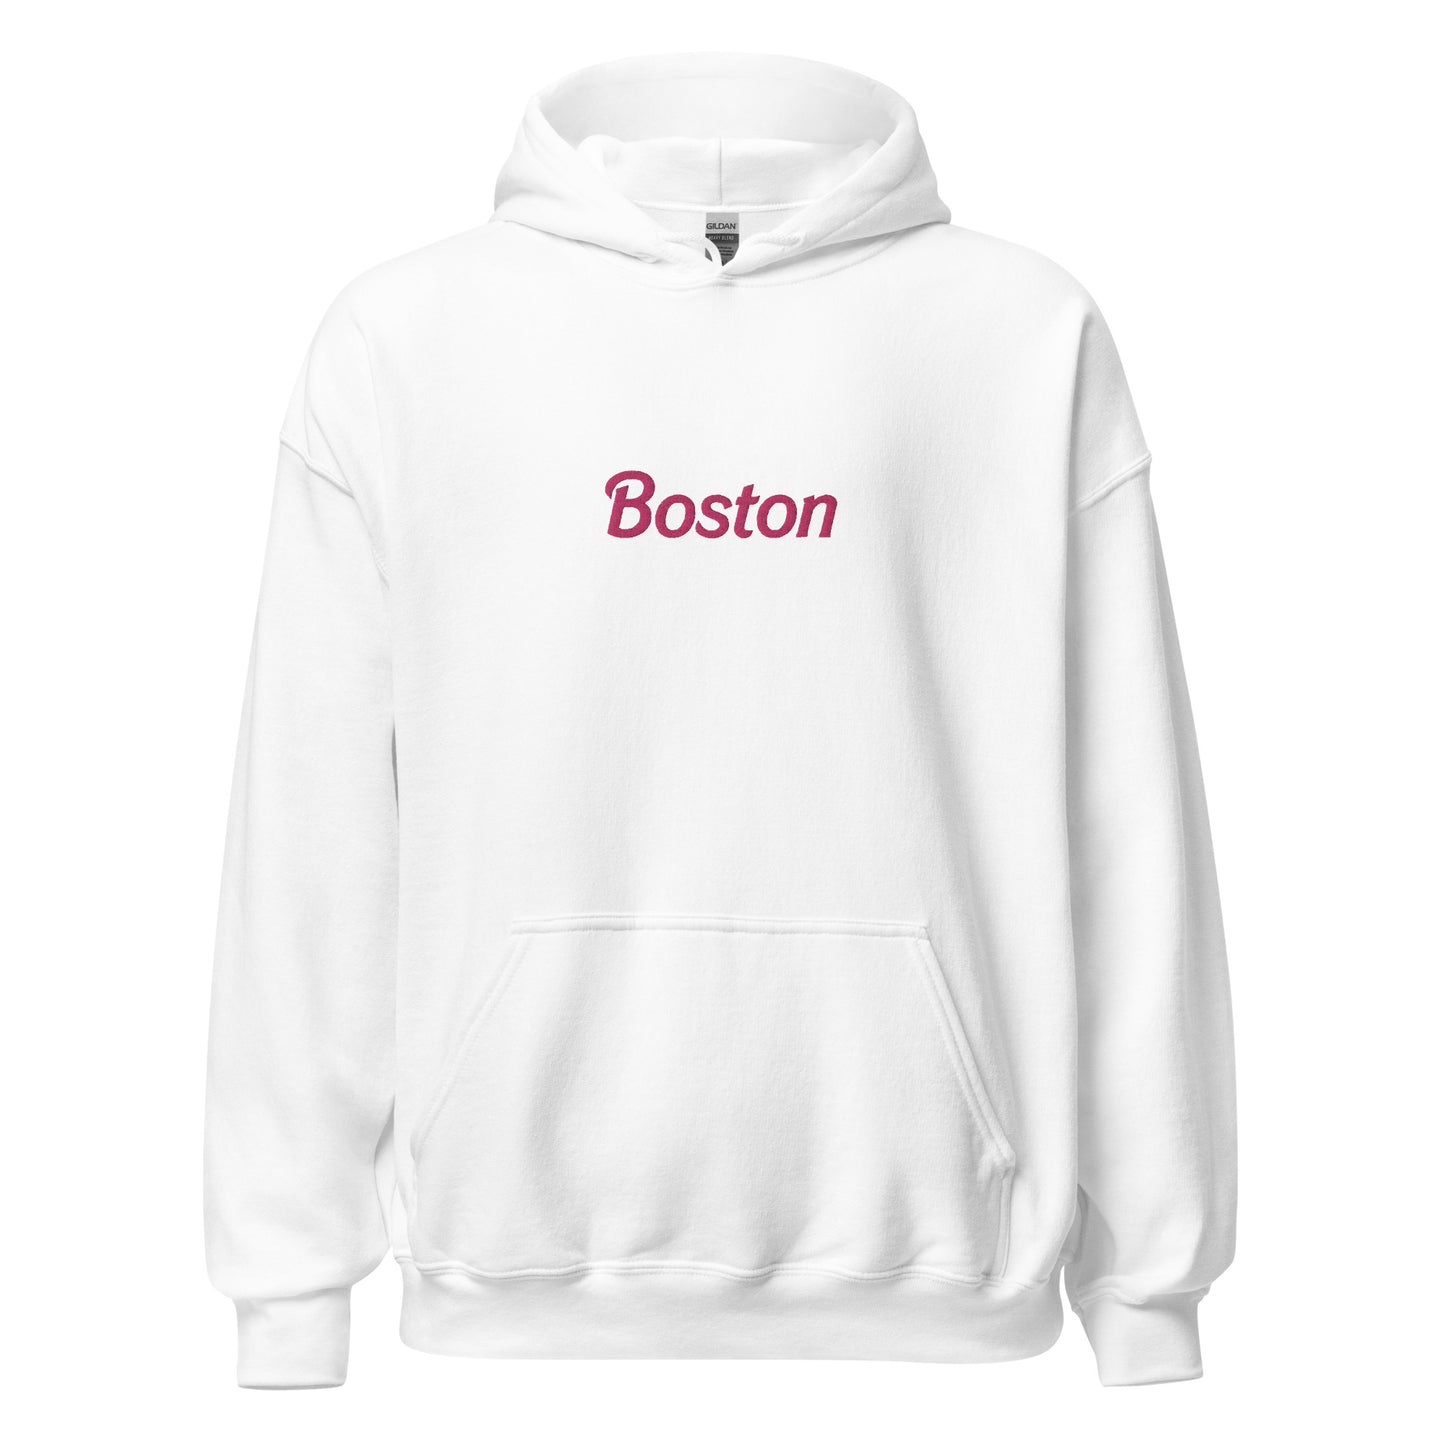 Pink Boston Embroidered Hoodie